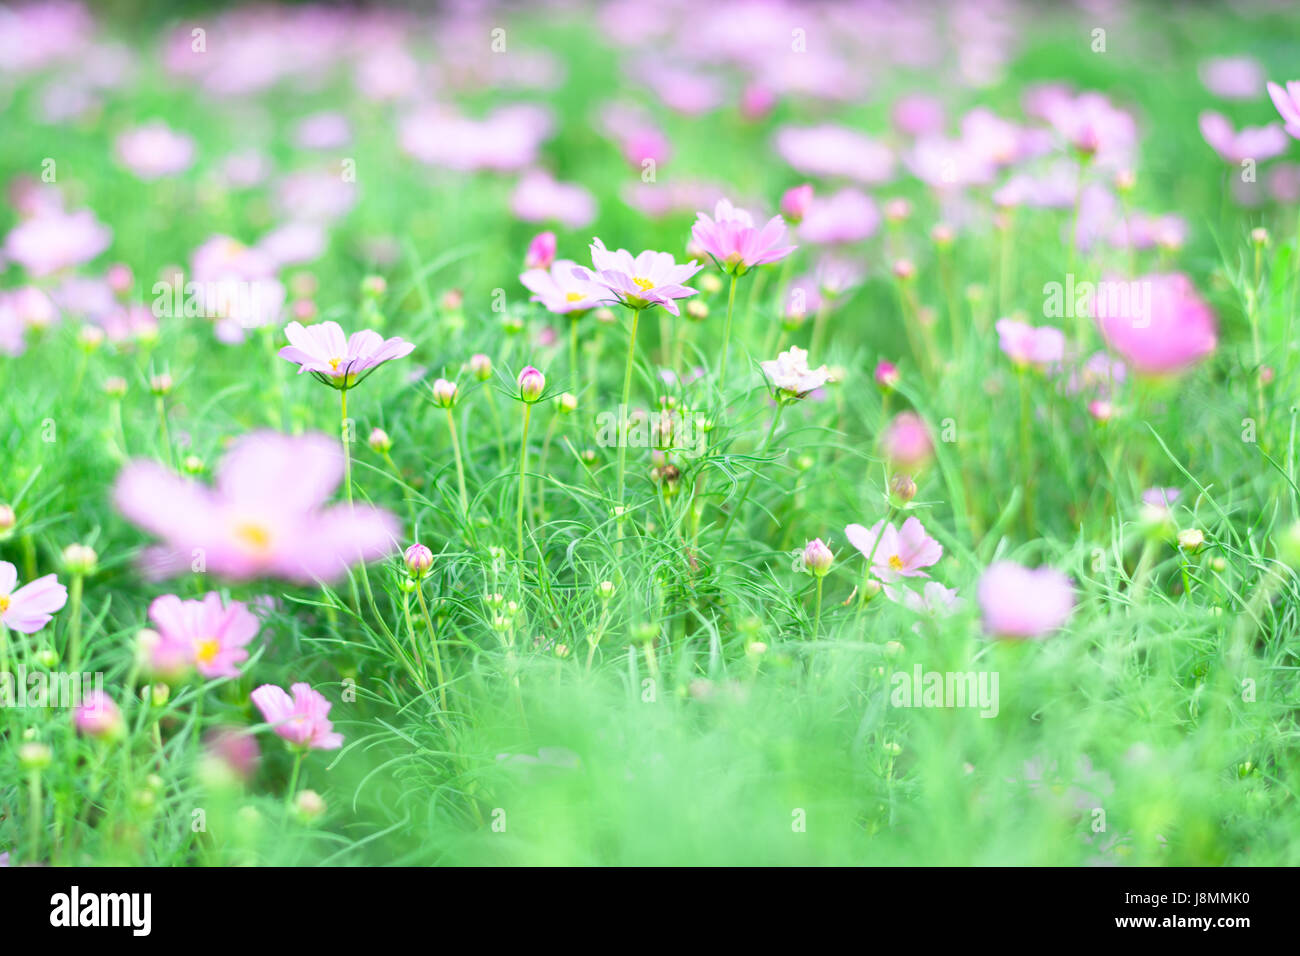 Selective focus colorful flowers for background Stock Photo